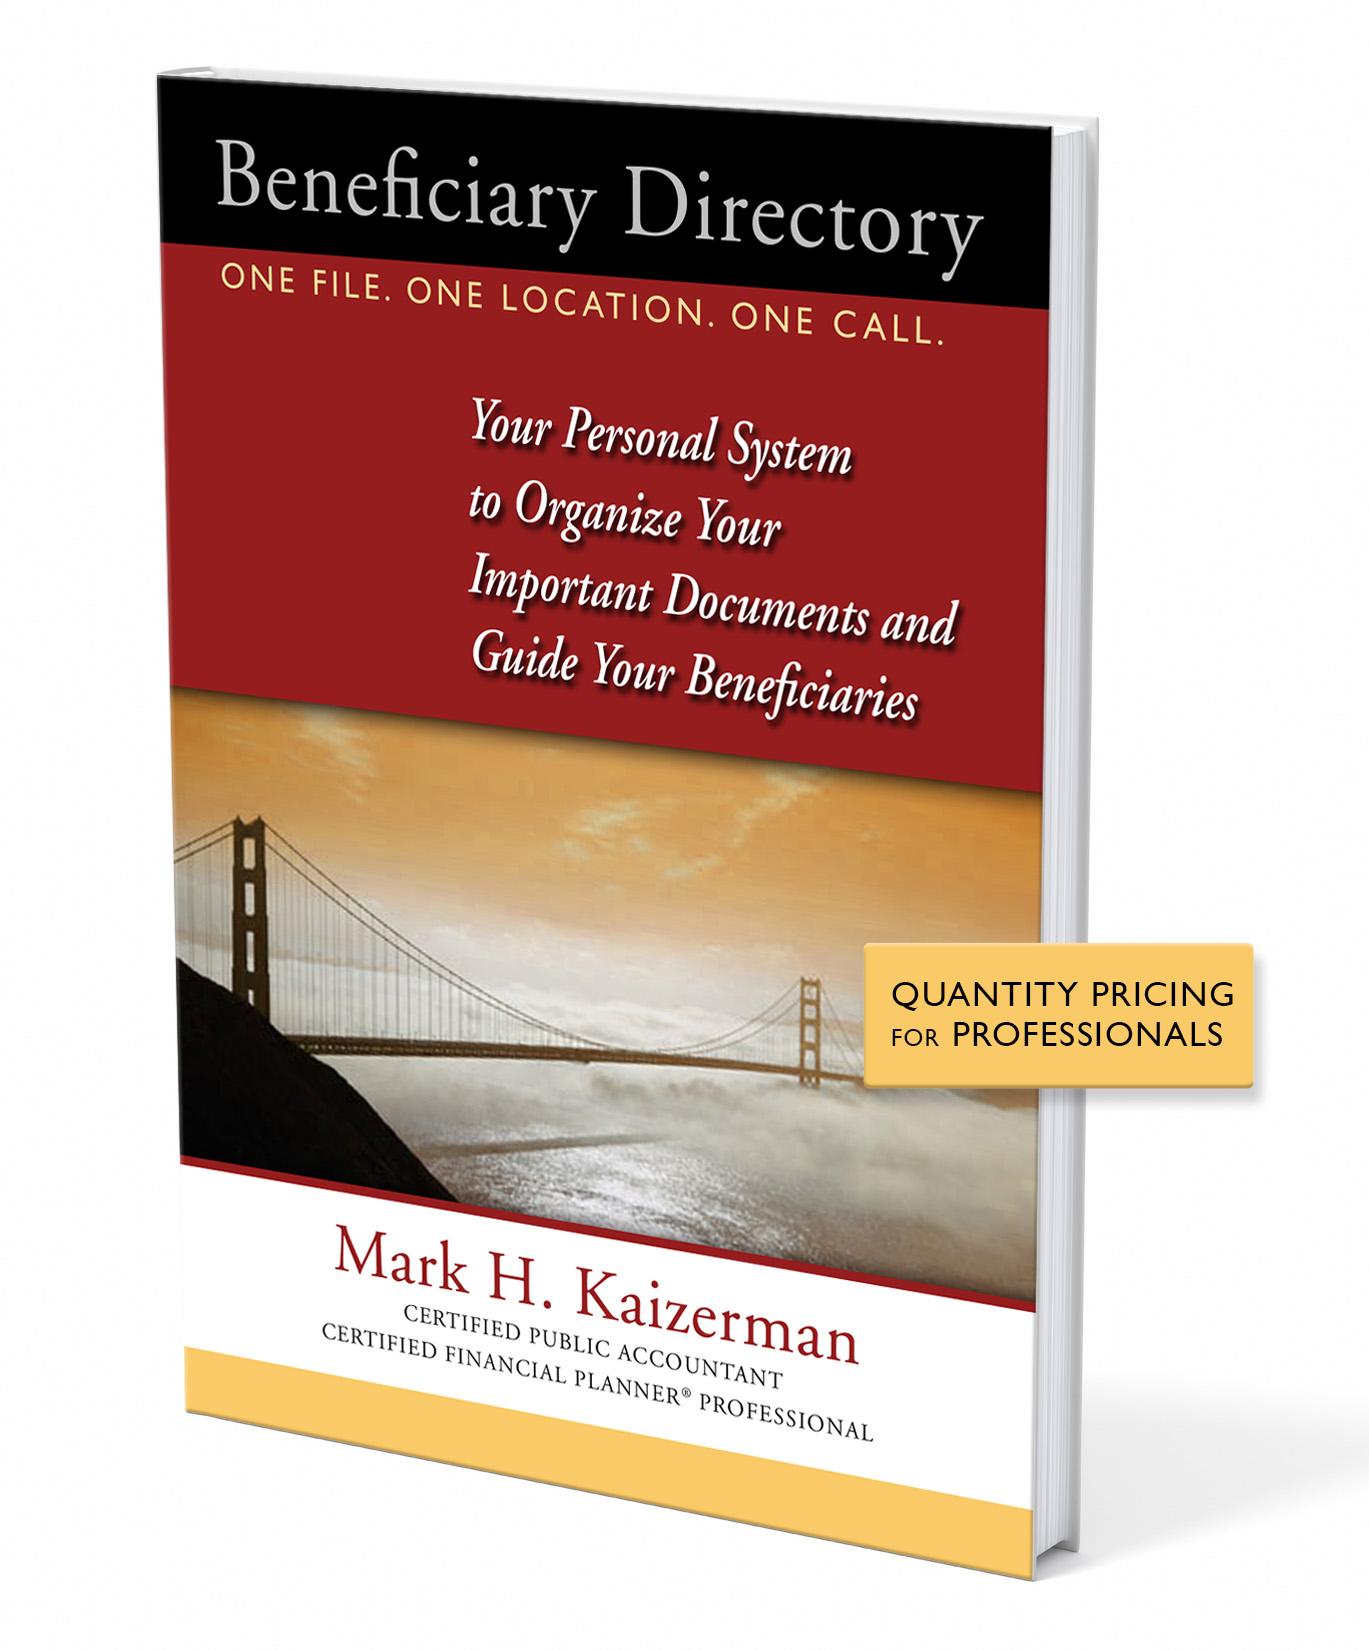 The Beneficiary Directory book